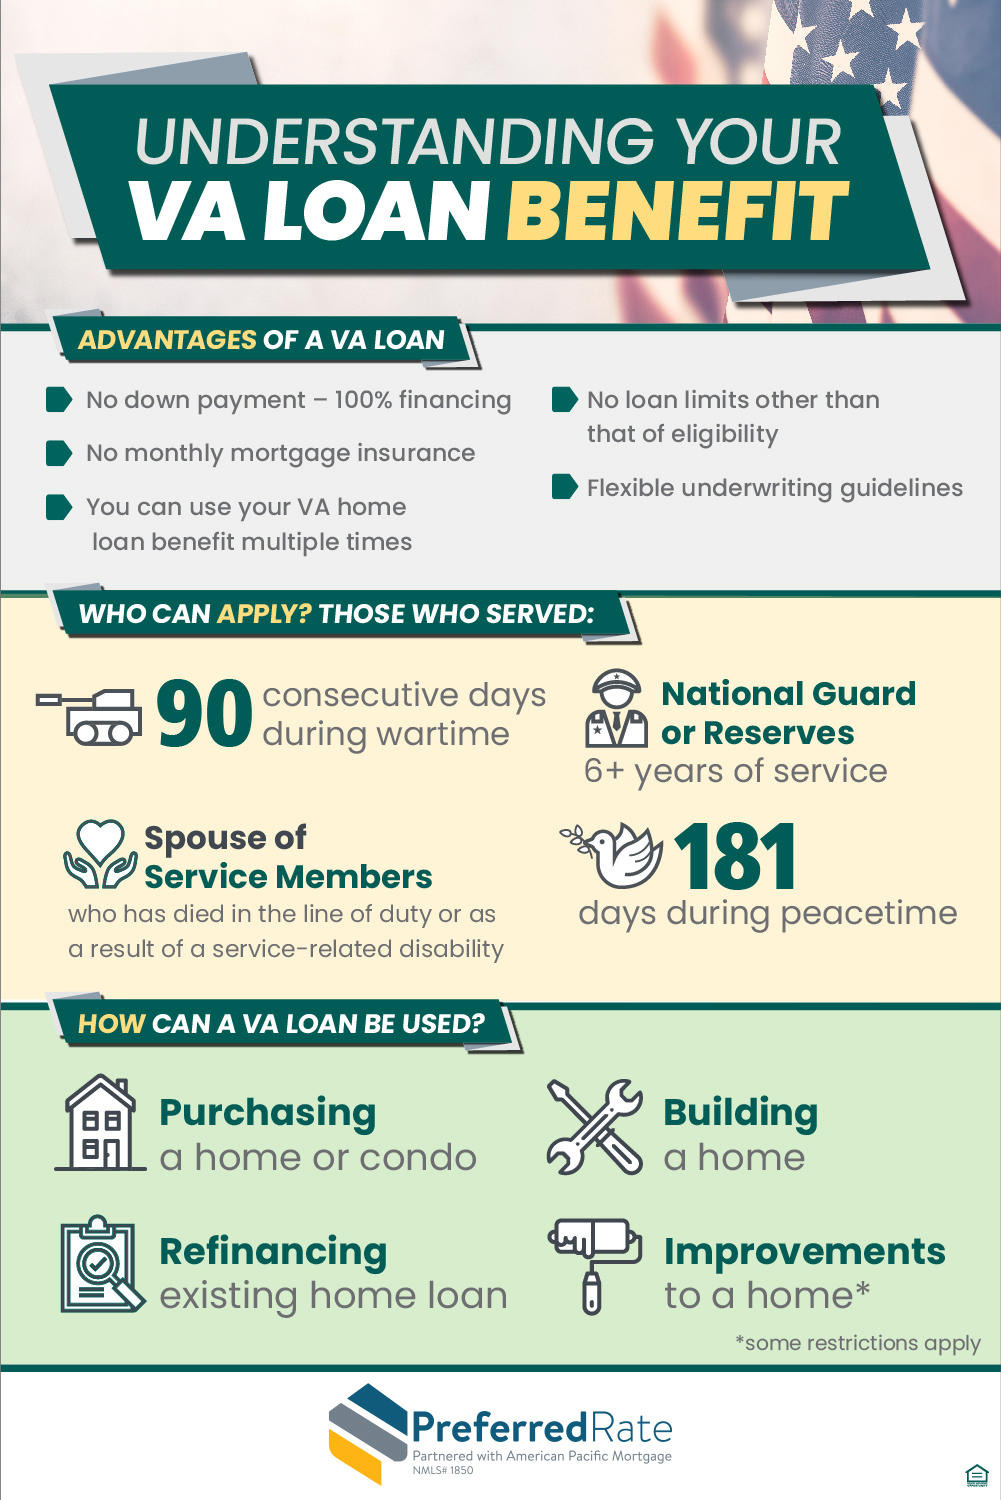 Curious about a VA loan? Here's a closer look at how it could benefit you. Loan Officer - 216621 Oakbrook Terrace (630)673-6735